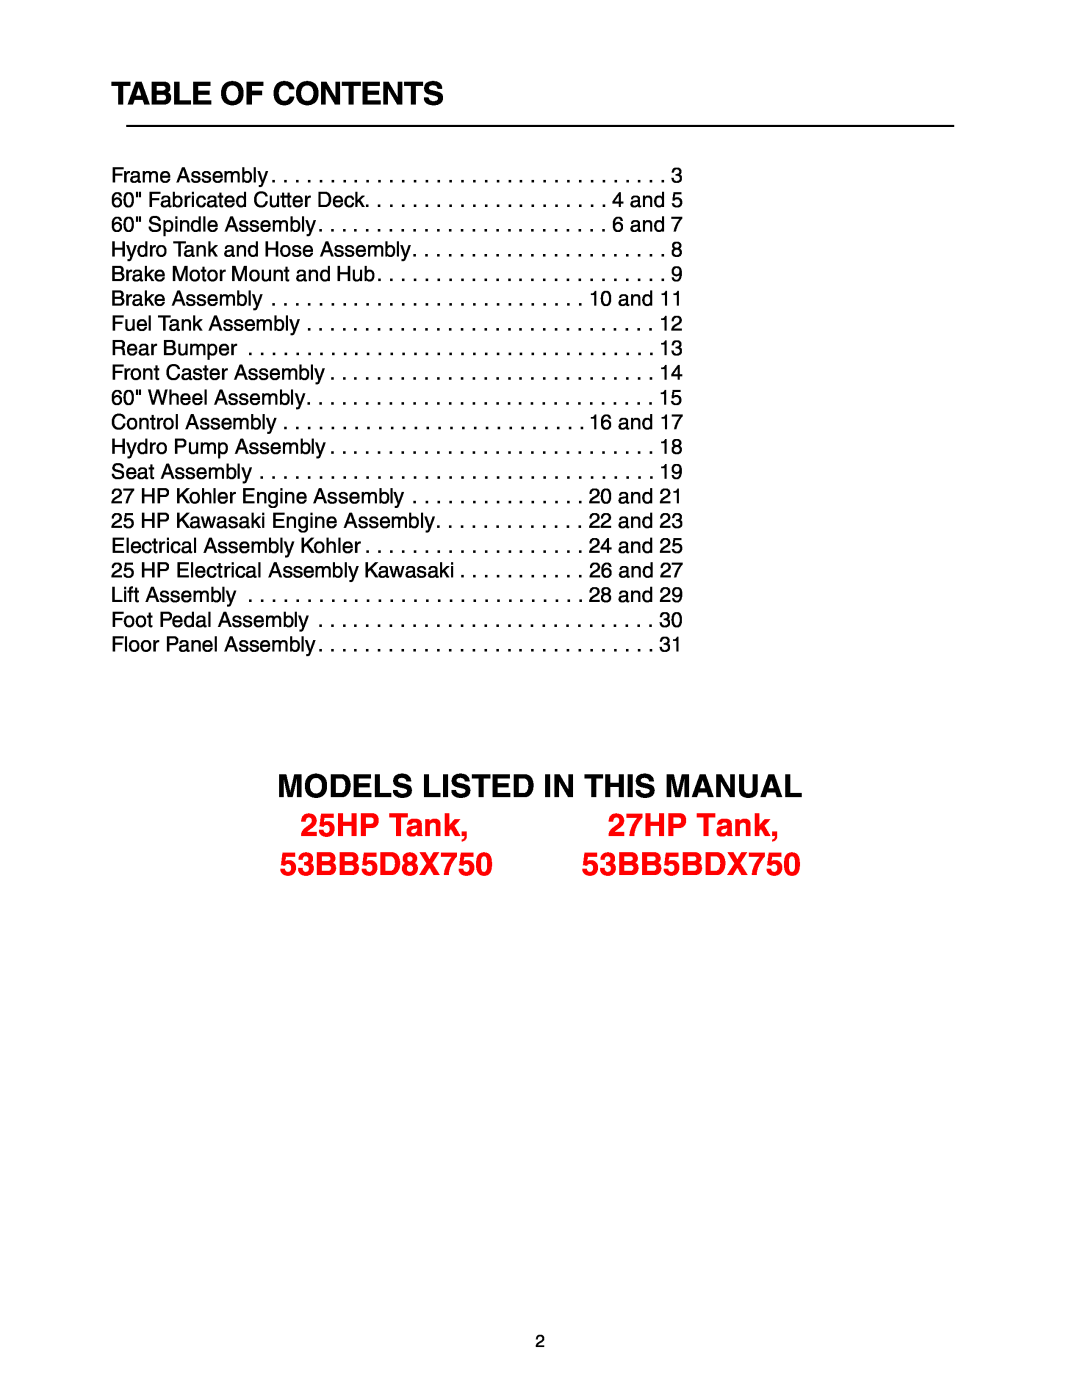 Cub Cadet Lawn Mower manual Table Of Contents, Models Listed In This Manual, 27HP Tank, 53BB5D8X750, 53BB5BDX750, 25HP Tank 